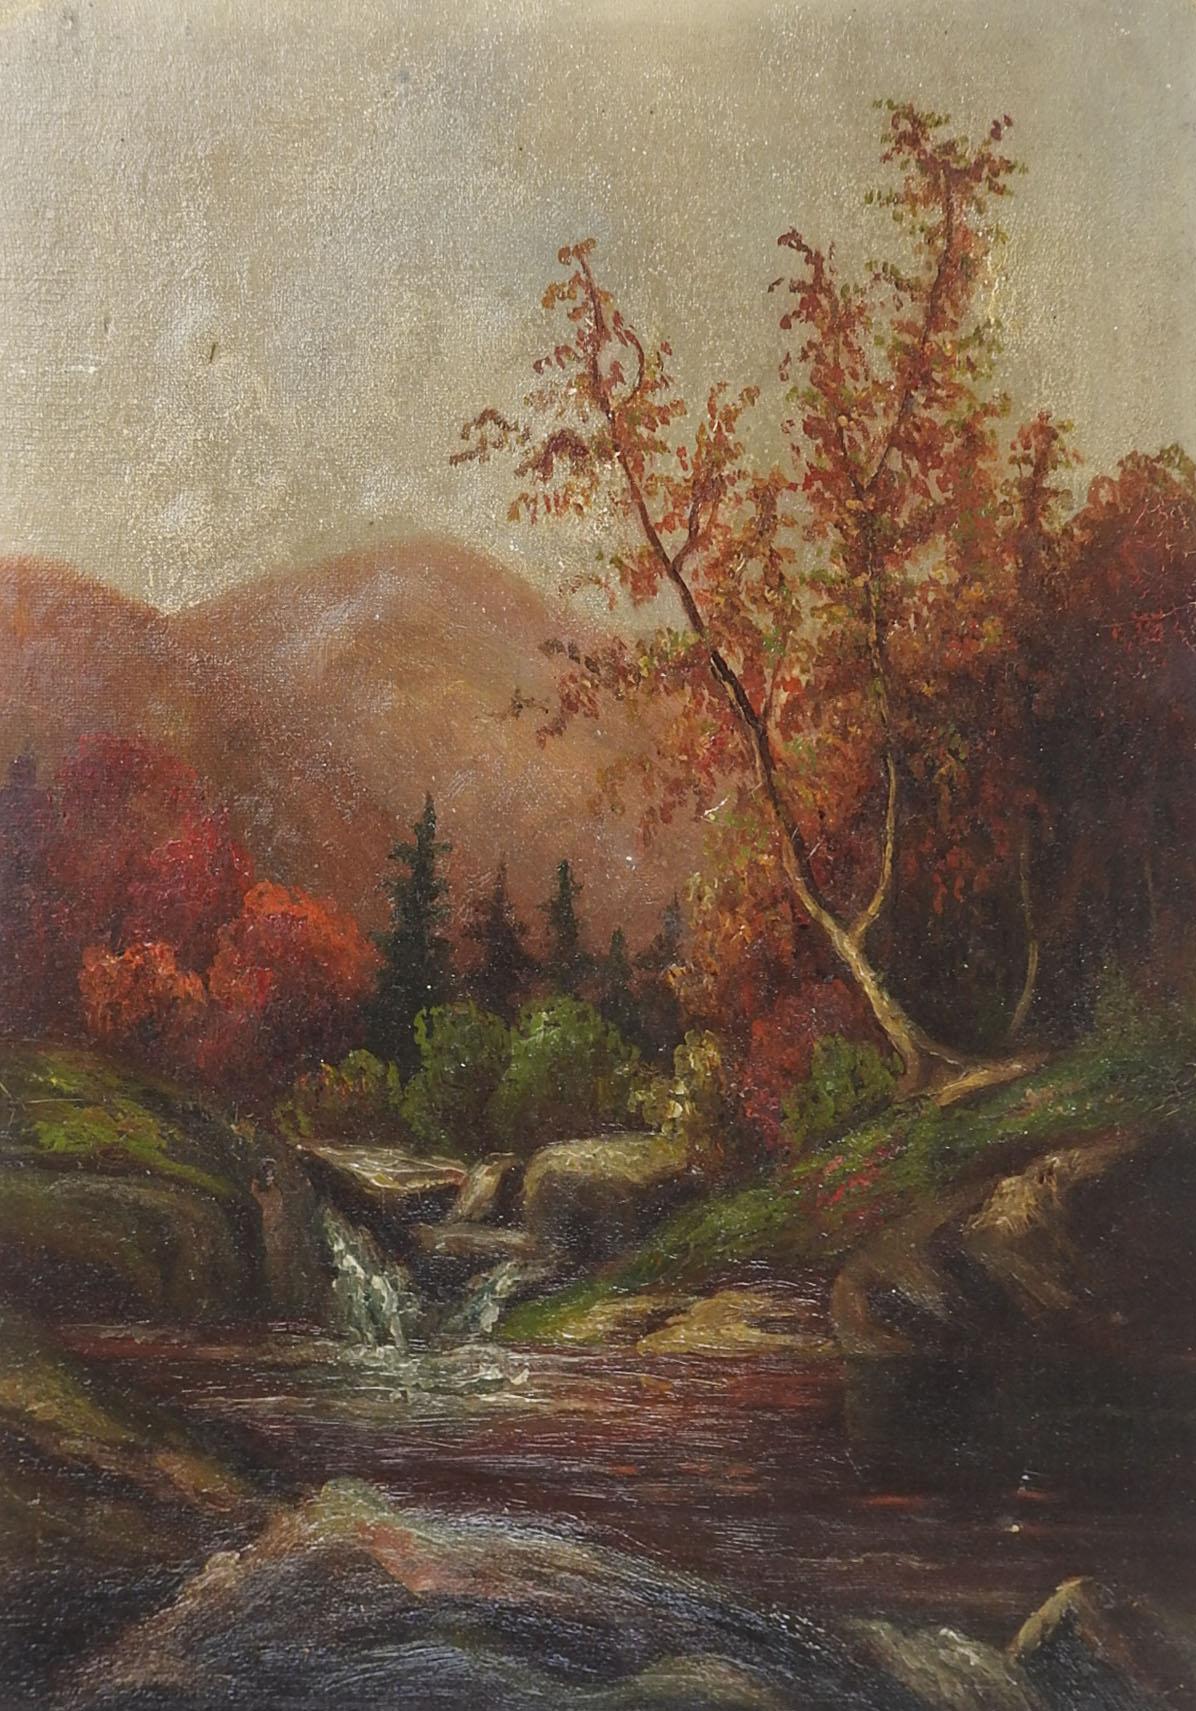 Antique late 19th century oil on canvas mountain river landscape painting. Unsigned. Unframed, flat mounted on cardboard backing, edge wear, tiny hole upper left.